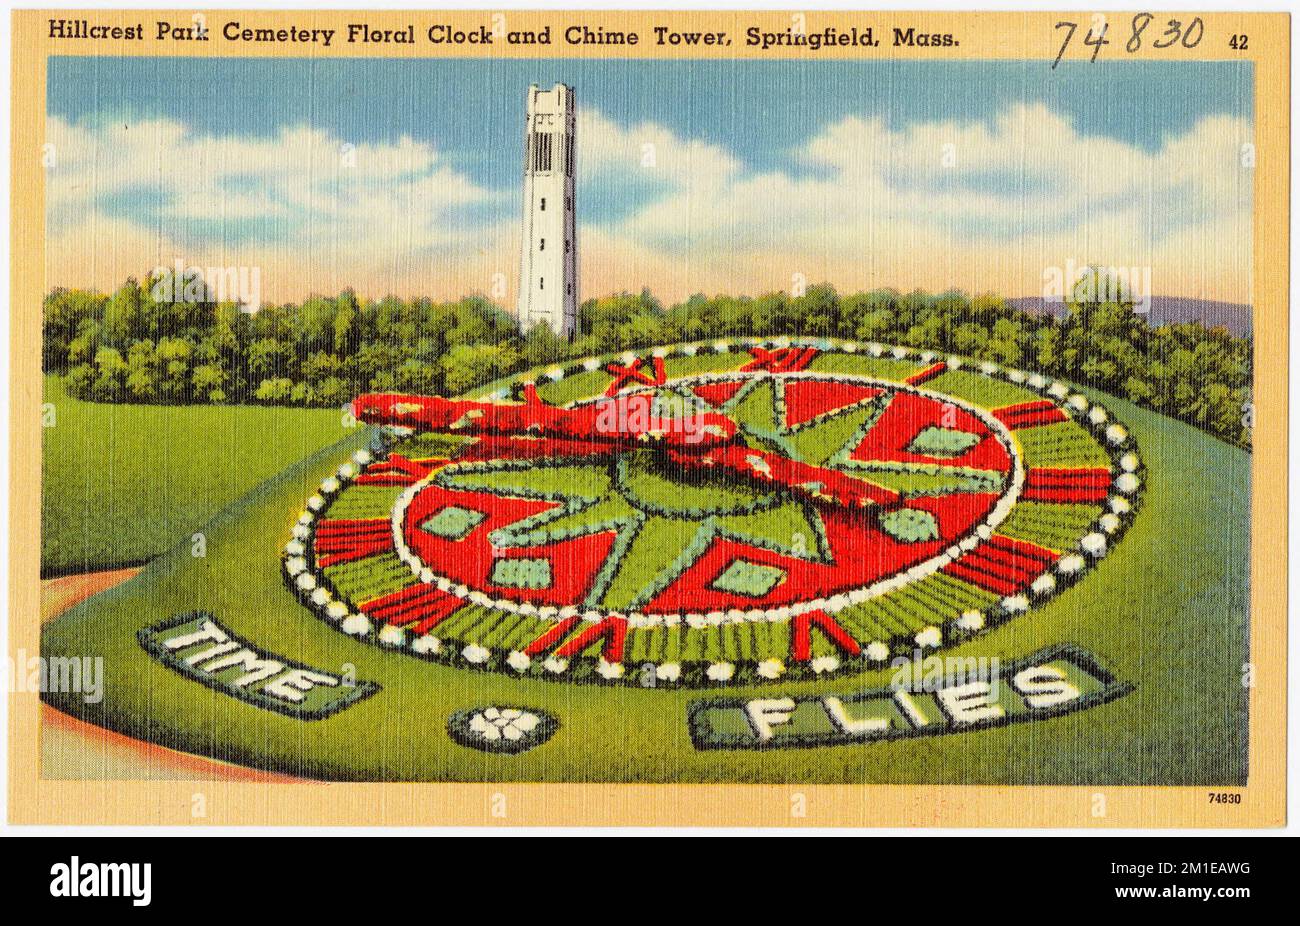 Hillcrest Park Cemetery Floral Clock and Chime Tower, Springfield, Mass. , Towers, Parks, Tichnor Brothers Collection, postcards of the United States Stock Photo